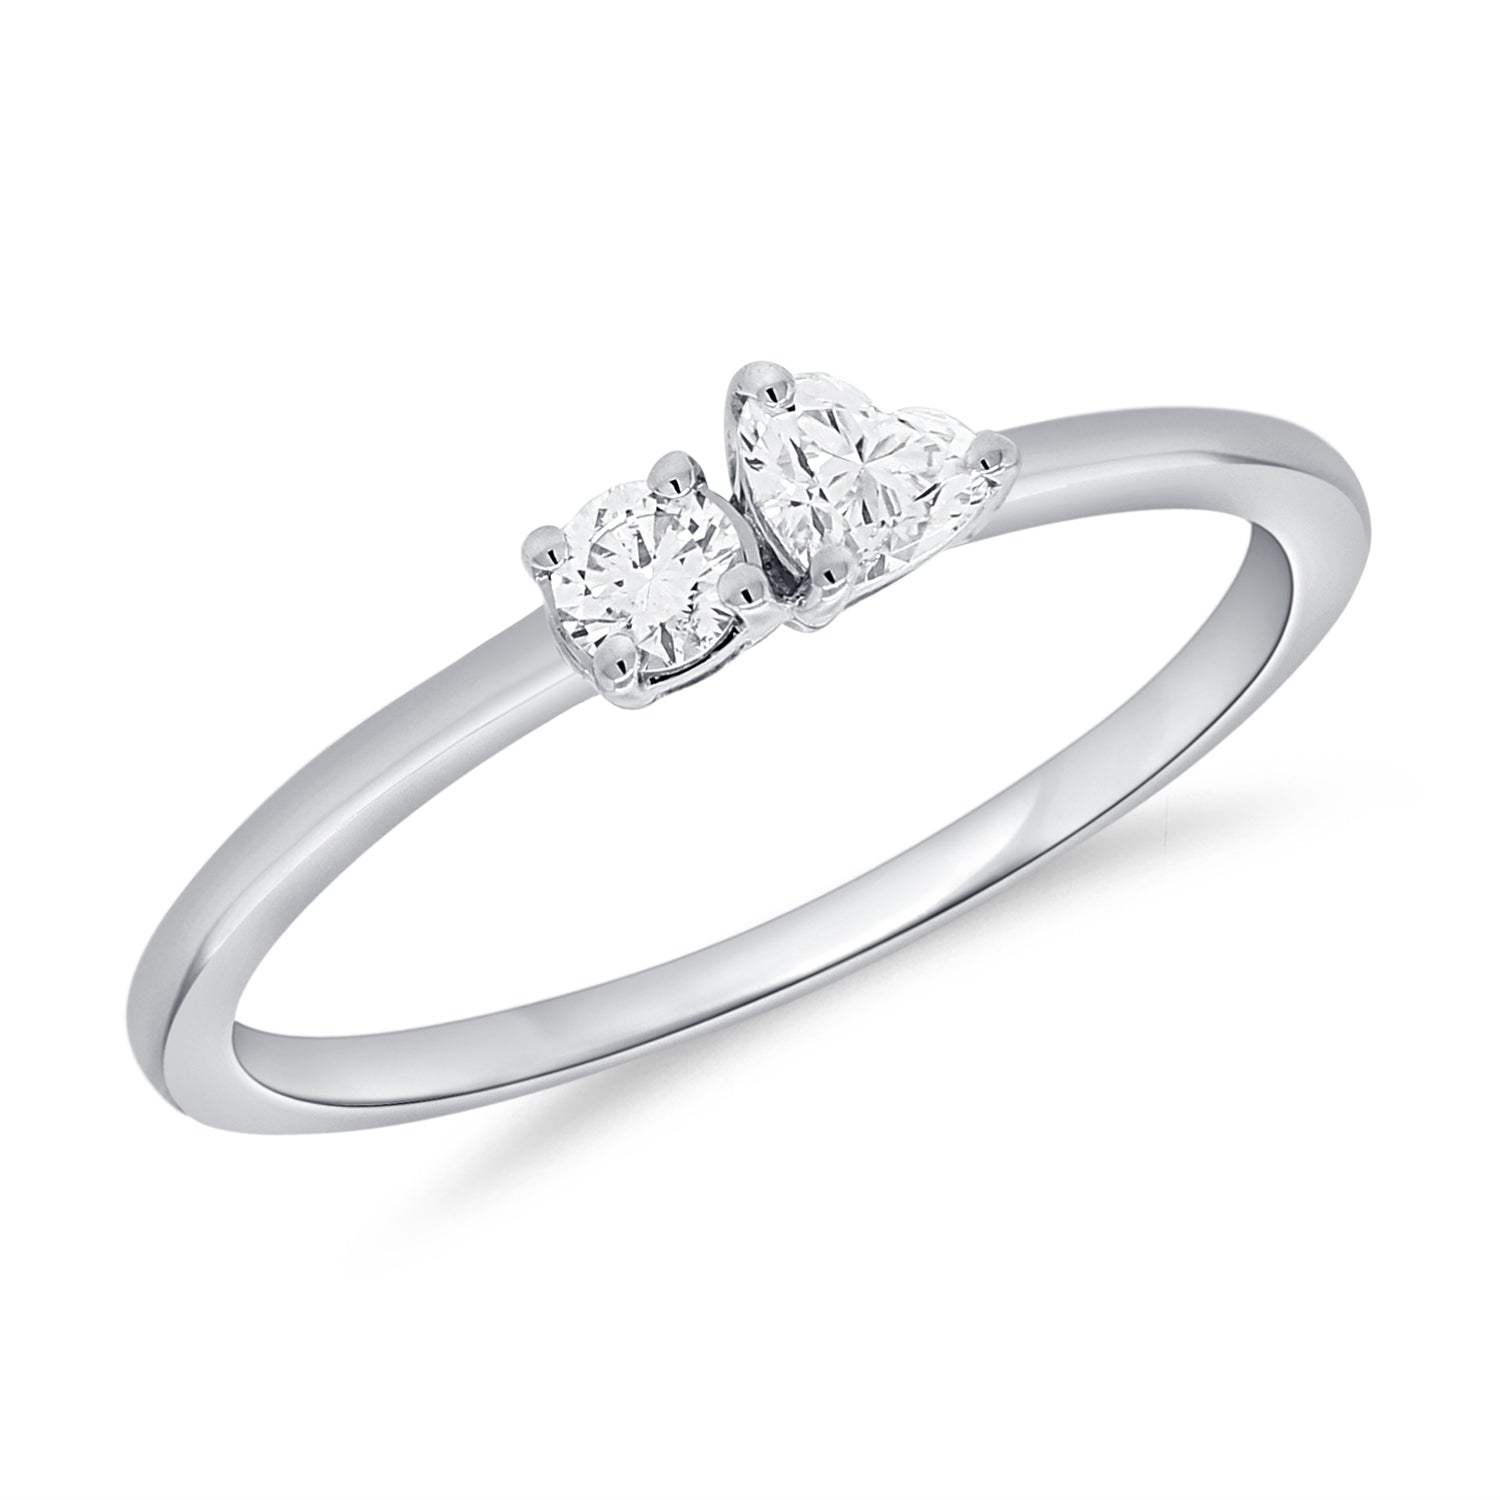 12 Parts of an Engagement ring, Anatomy, & Common Terms - Soha Diamond Co.™